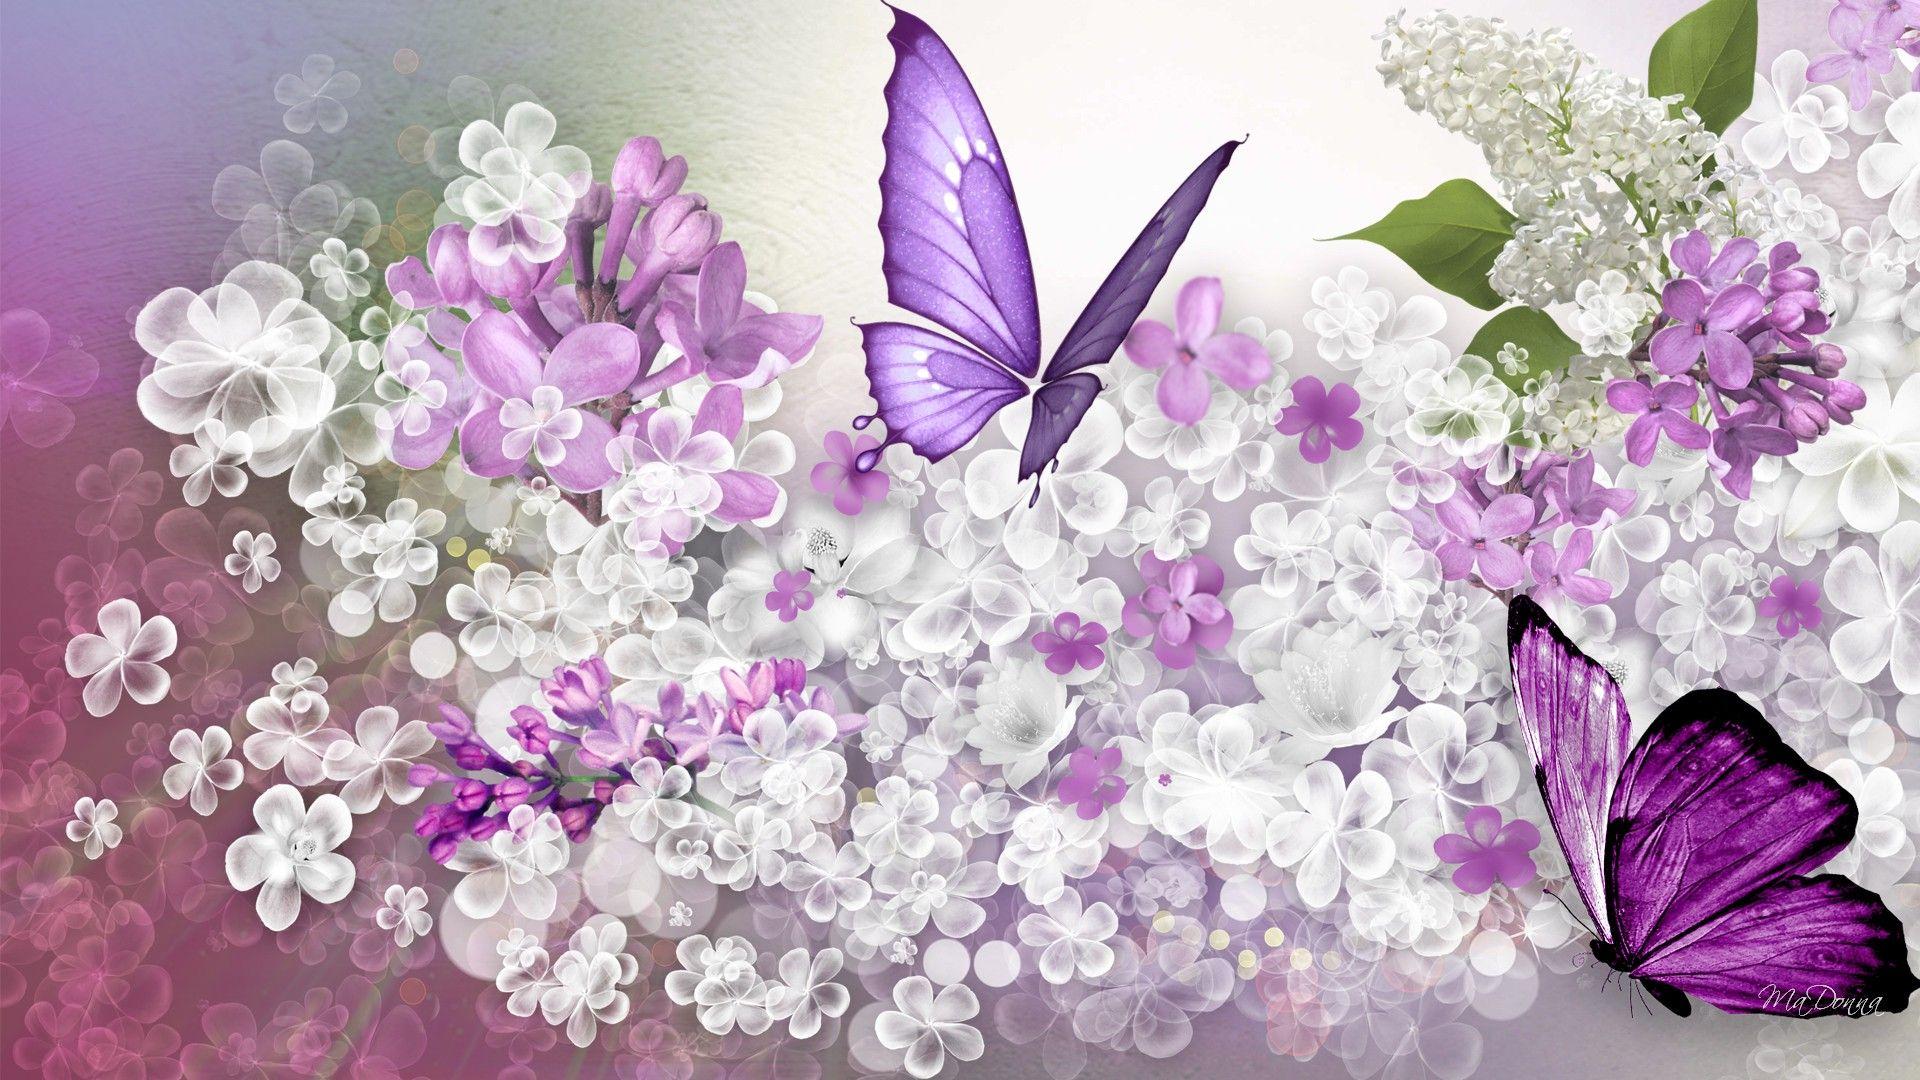 High Definition Collection: Lilac Wallpaper, 37 Full HD Lilac